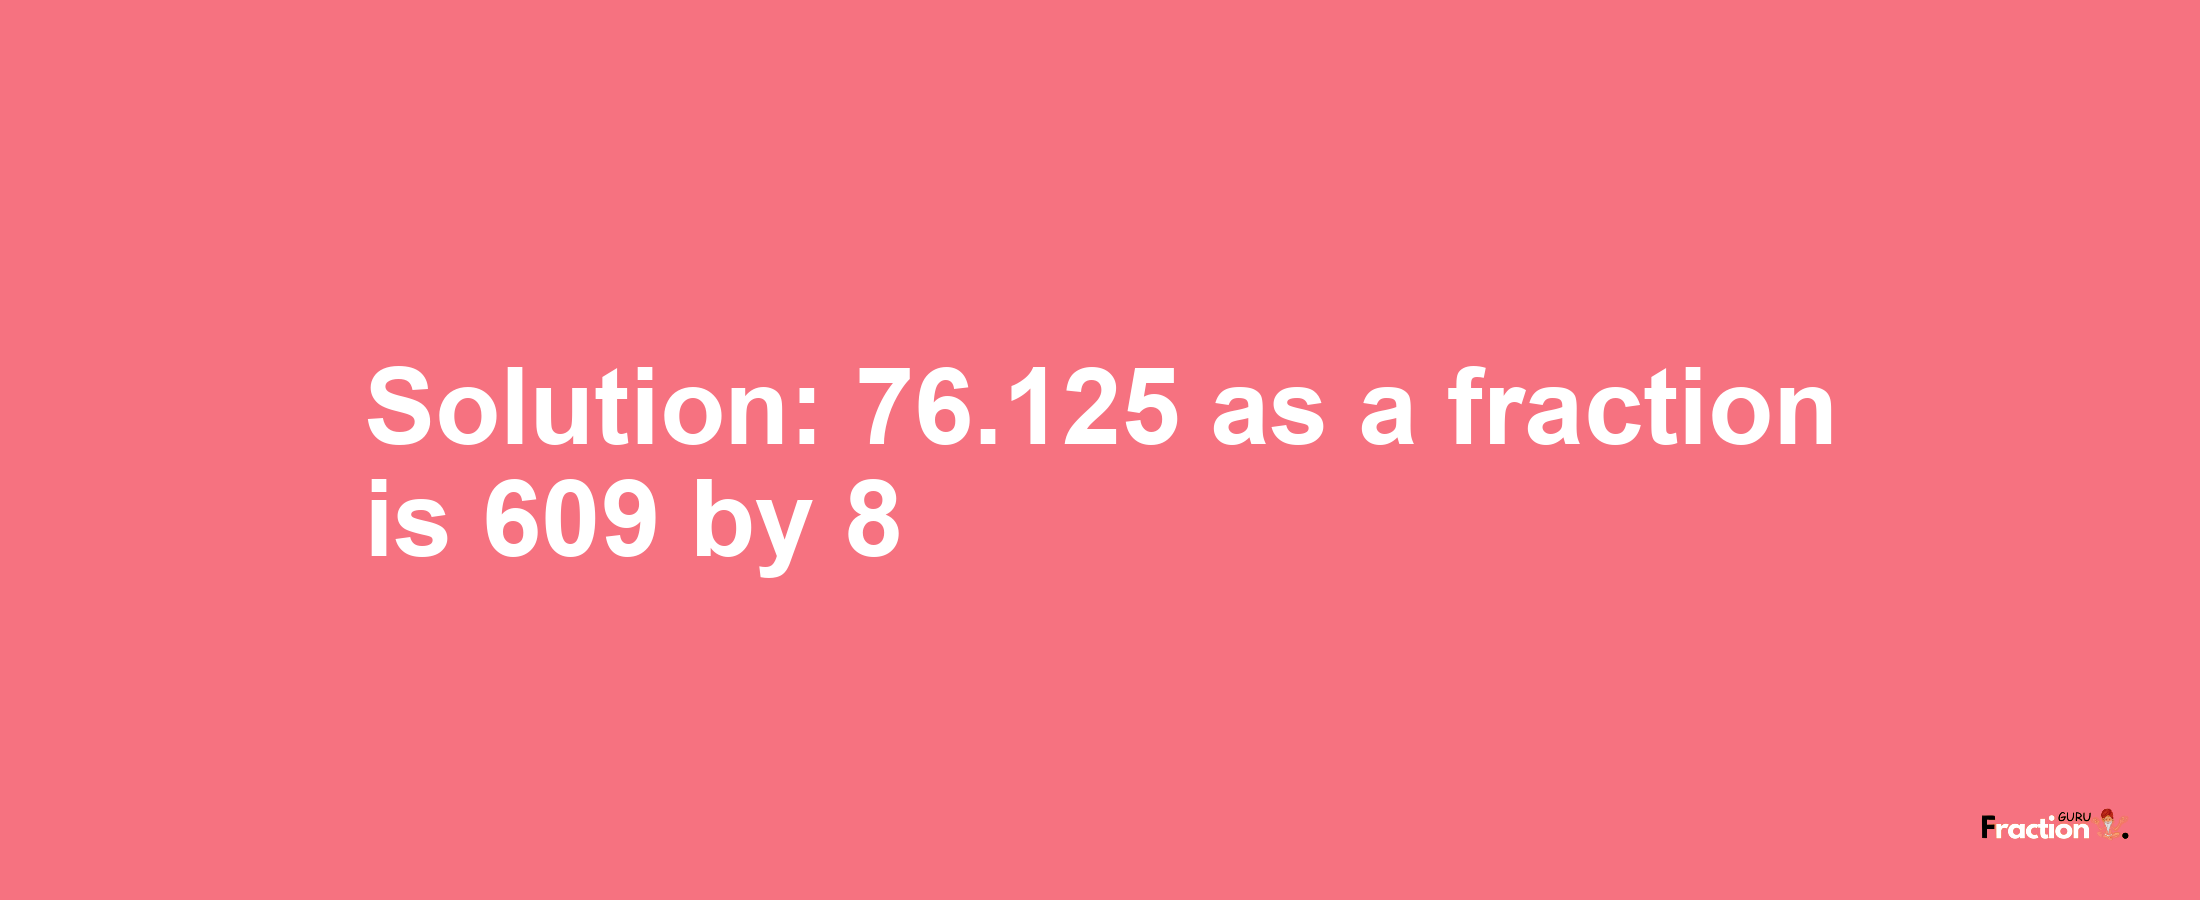 Solution:76.125 as a fraction is 609/8